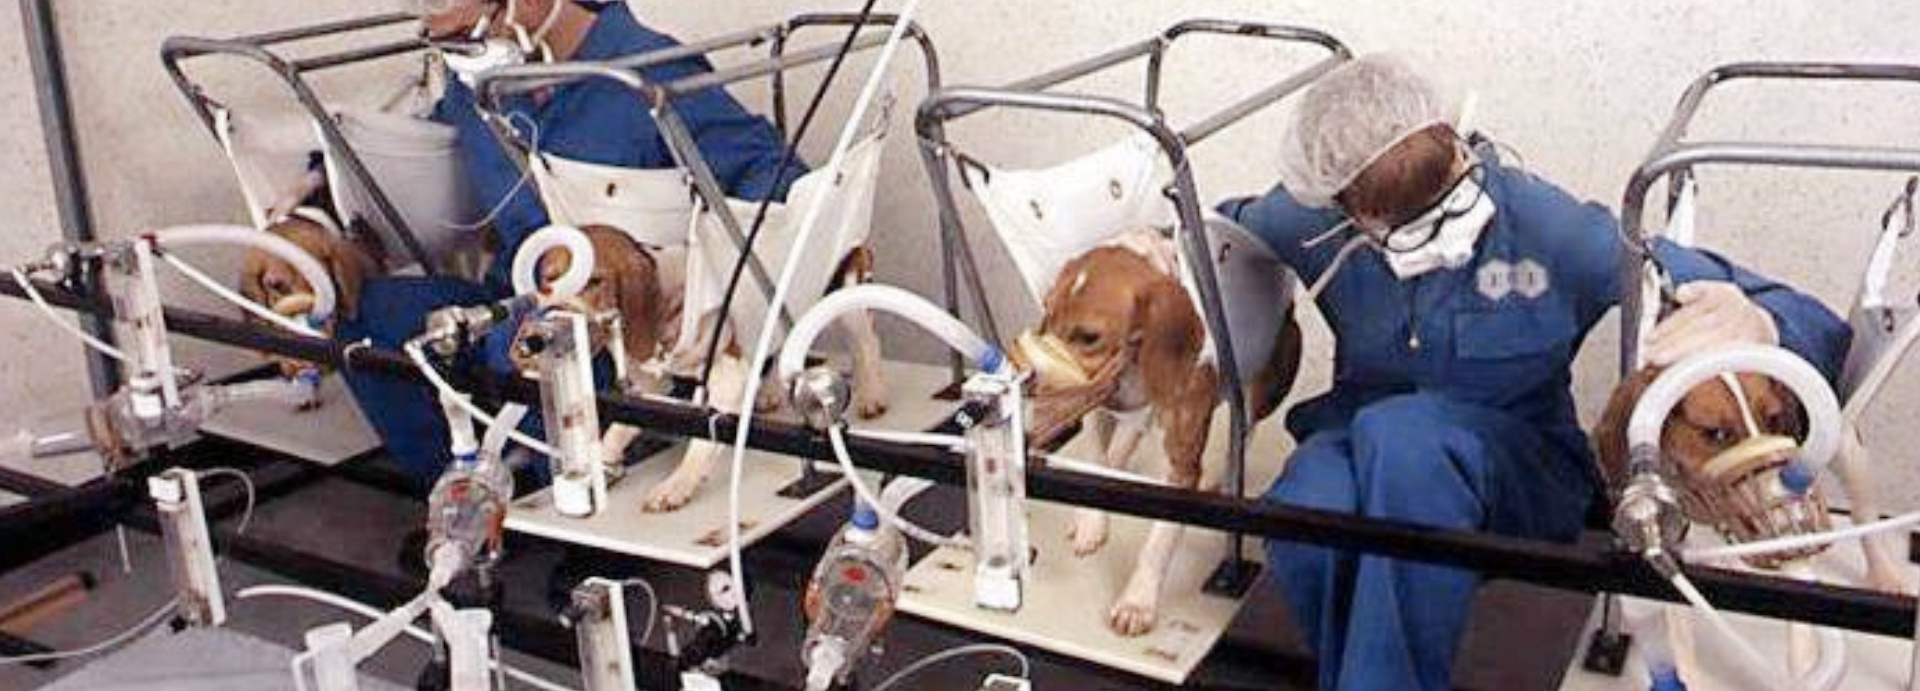 Photo Reveals a Horrific Day in the Life of a Lab Beagle – Here’s What We Can Do to Help